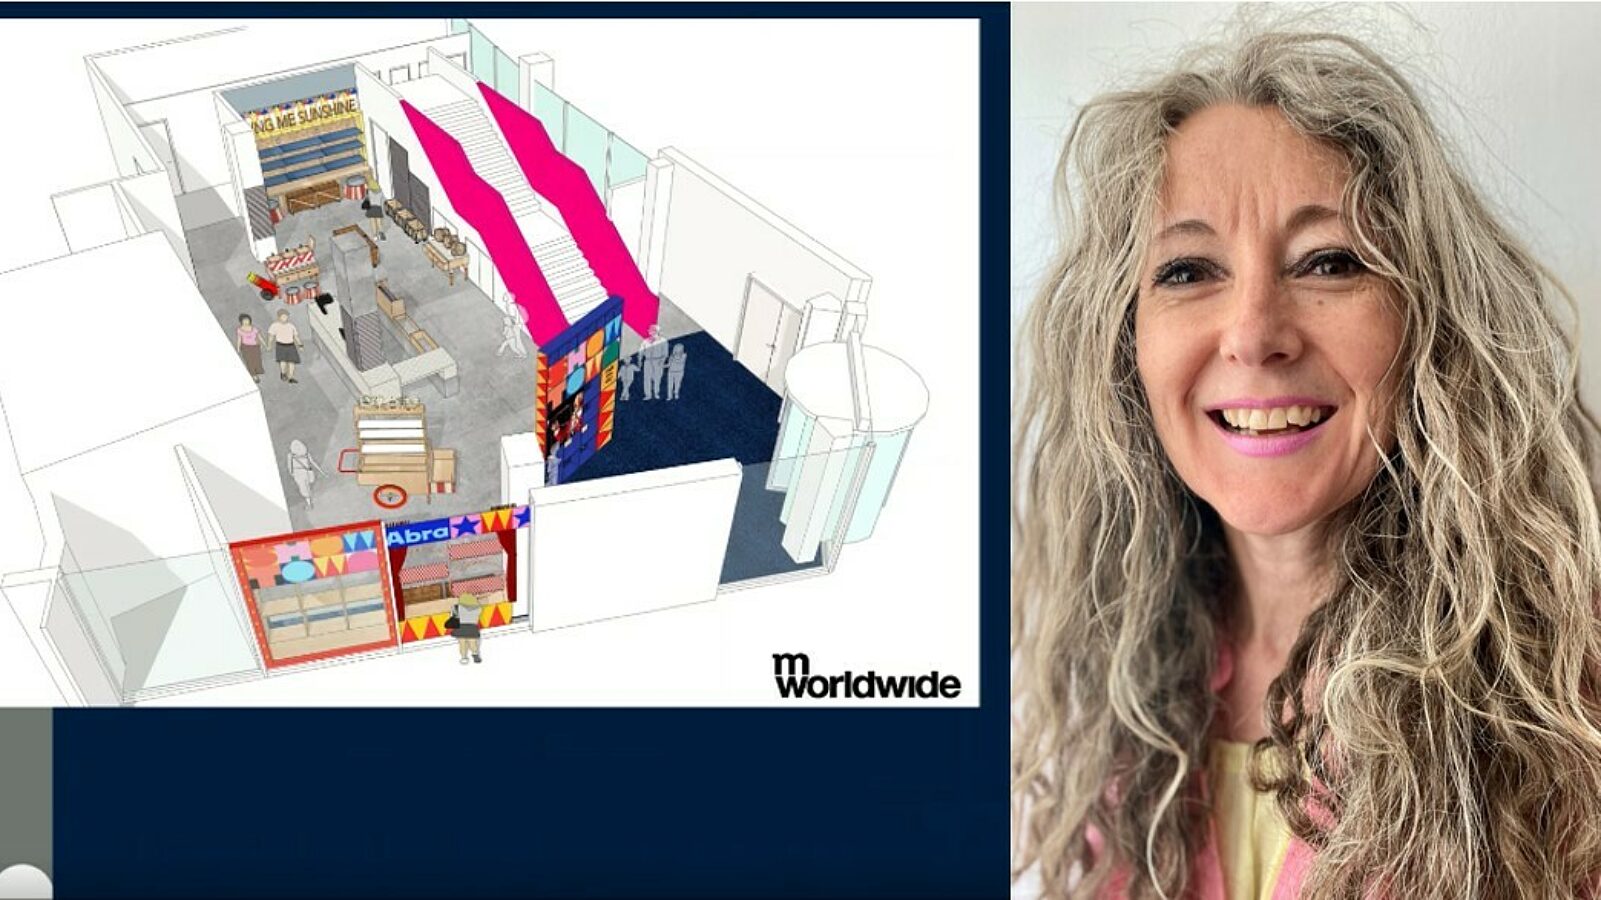 Mworldwide shop and entrance image with head and shoulders shot of Helen Shelley included